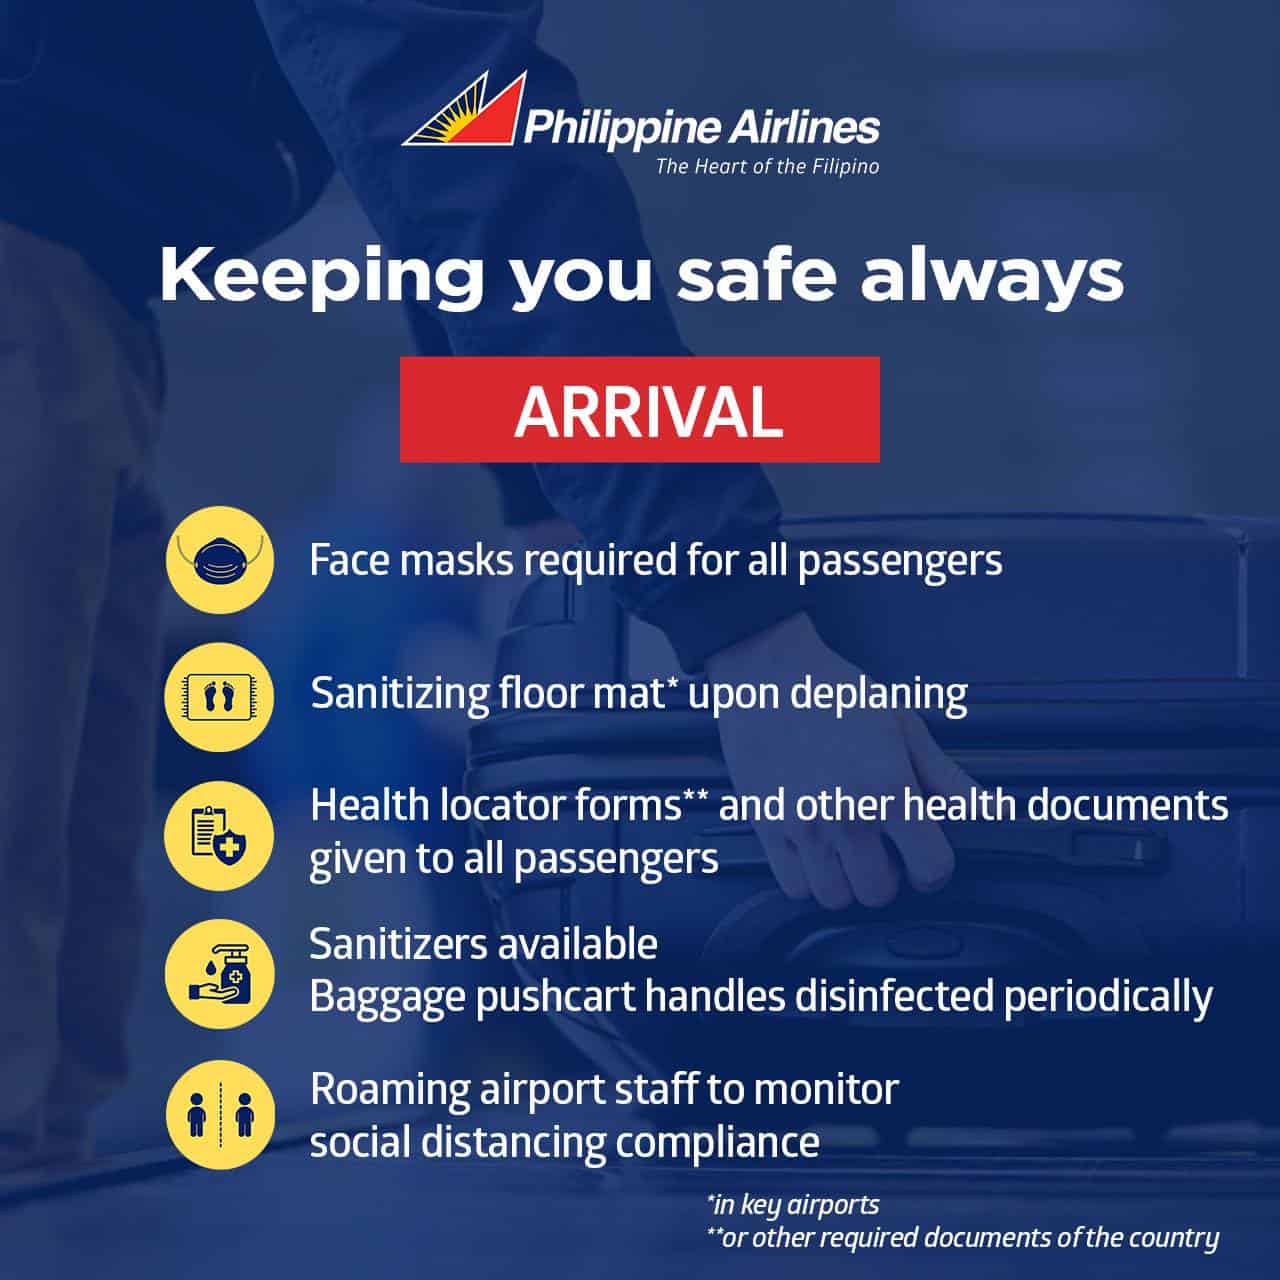 Domestic Travel Requirements Philippine Airlines